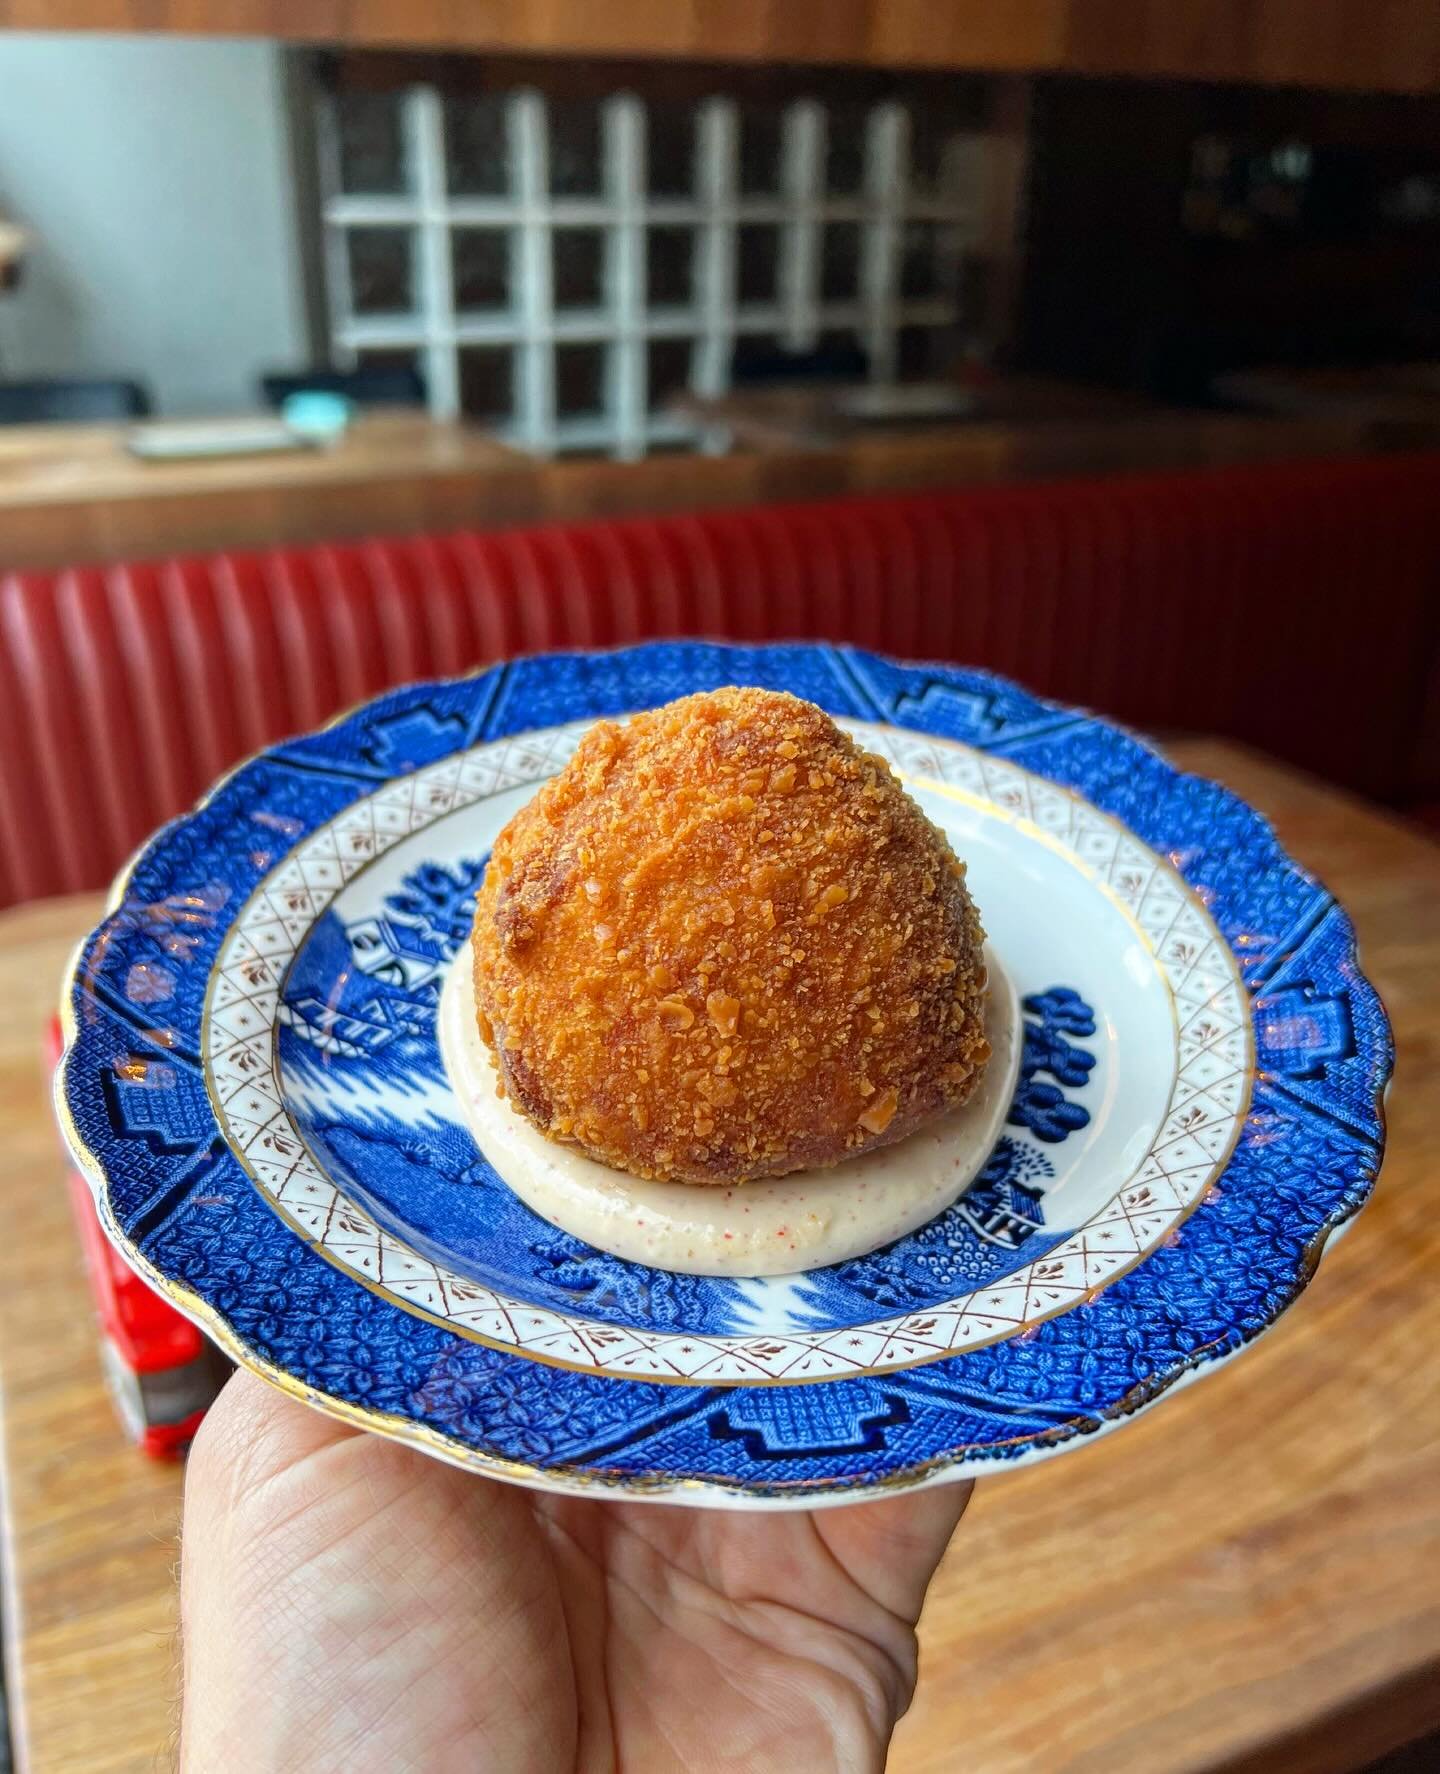 SPEC for WEDS, MAY 1ST! brazilian coxinha!!! chicken and potato croquette (traditional) pink peppercorn sauce (untraditional but delicious). come git it! 🇧🇷🐔🍗🇧🇷🐔🍗🇧🇷🐔🍗🇧🇷🐔🍗🇧🇷🐔🍗🇧🇷🐔🍗🇧🇷🐔🍗🇧🇷🐔🍗🇧🇷🐔🍗🇧🇷🐔🍗🇧🇷🐔🍗🇧🇷🐔🍗